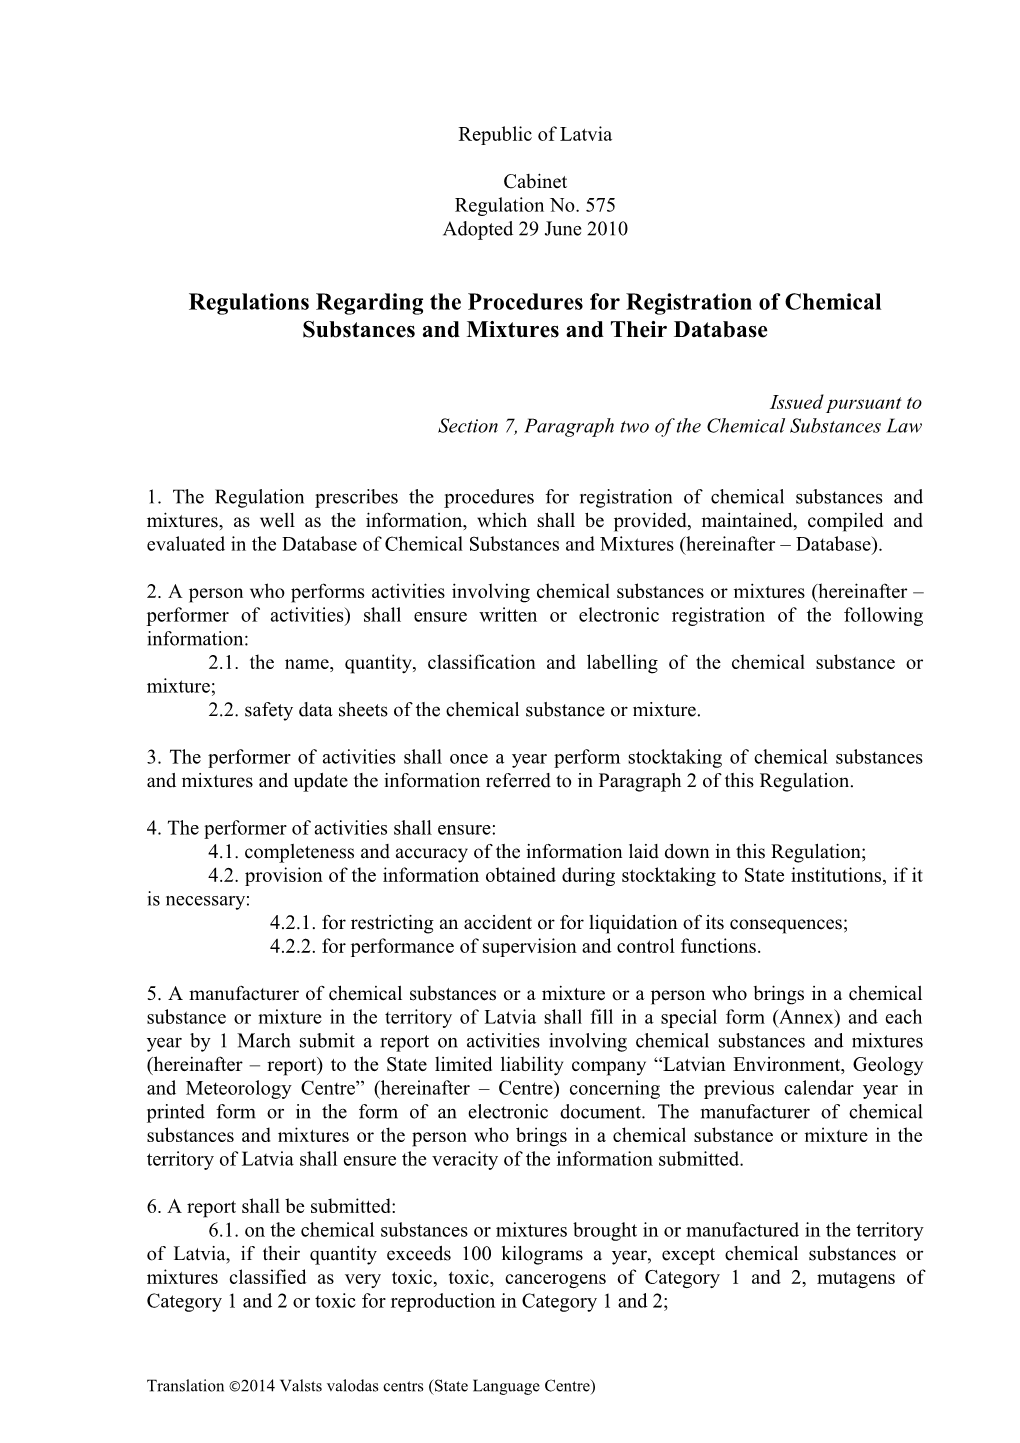 Regulations Regarding the Procedures for Registration of Chemical Substances and Mixtures